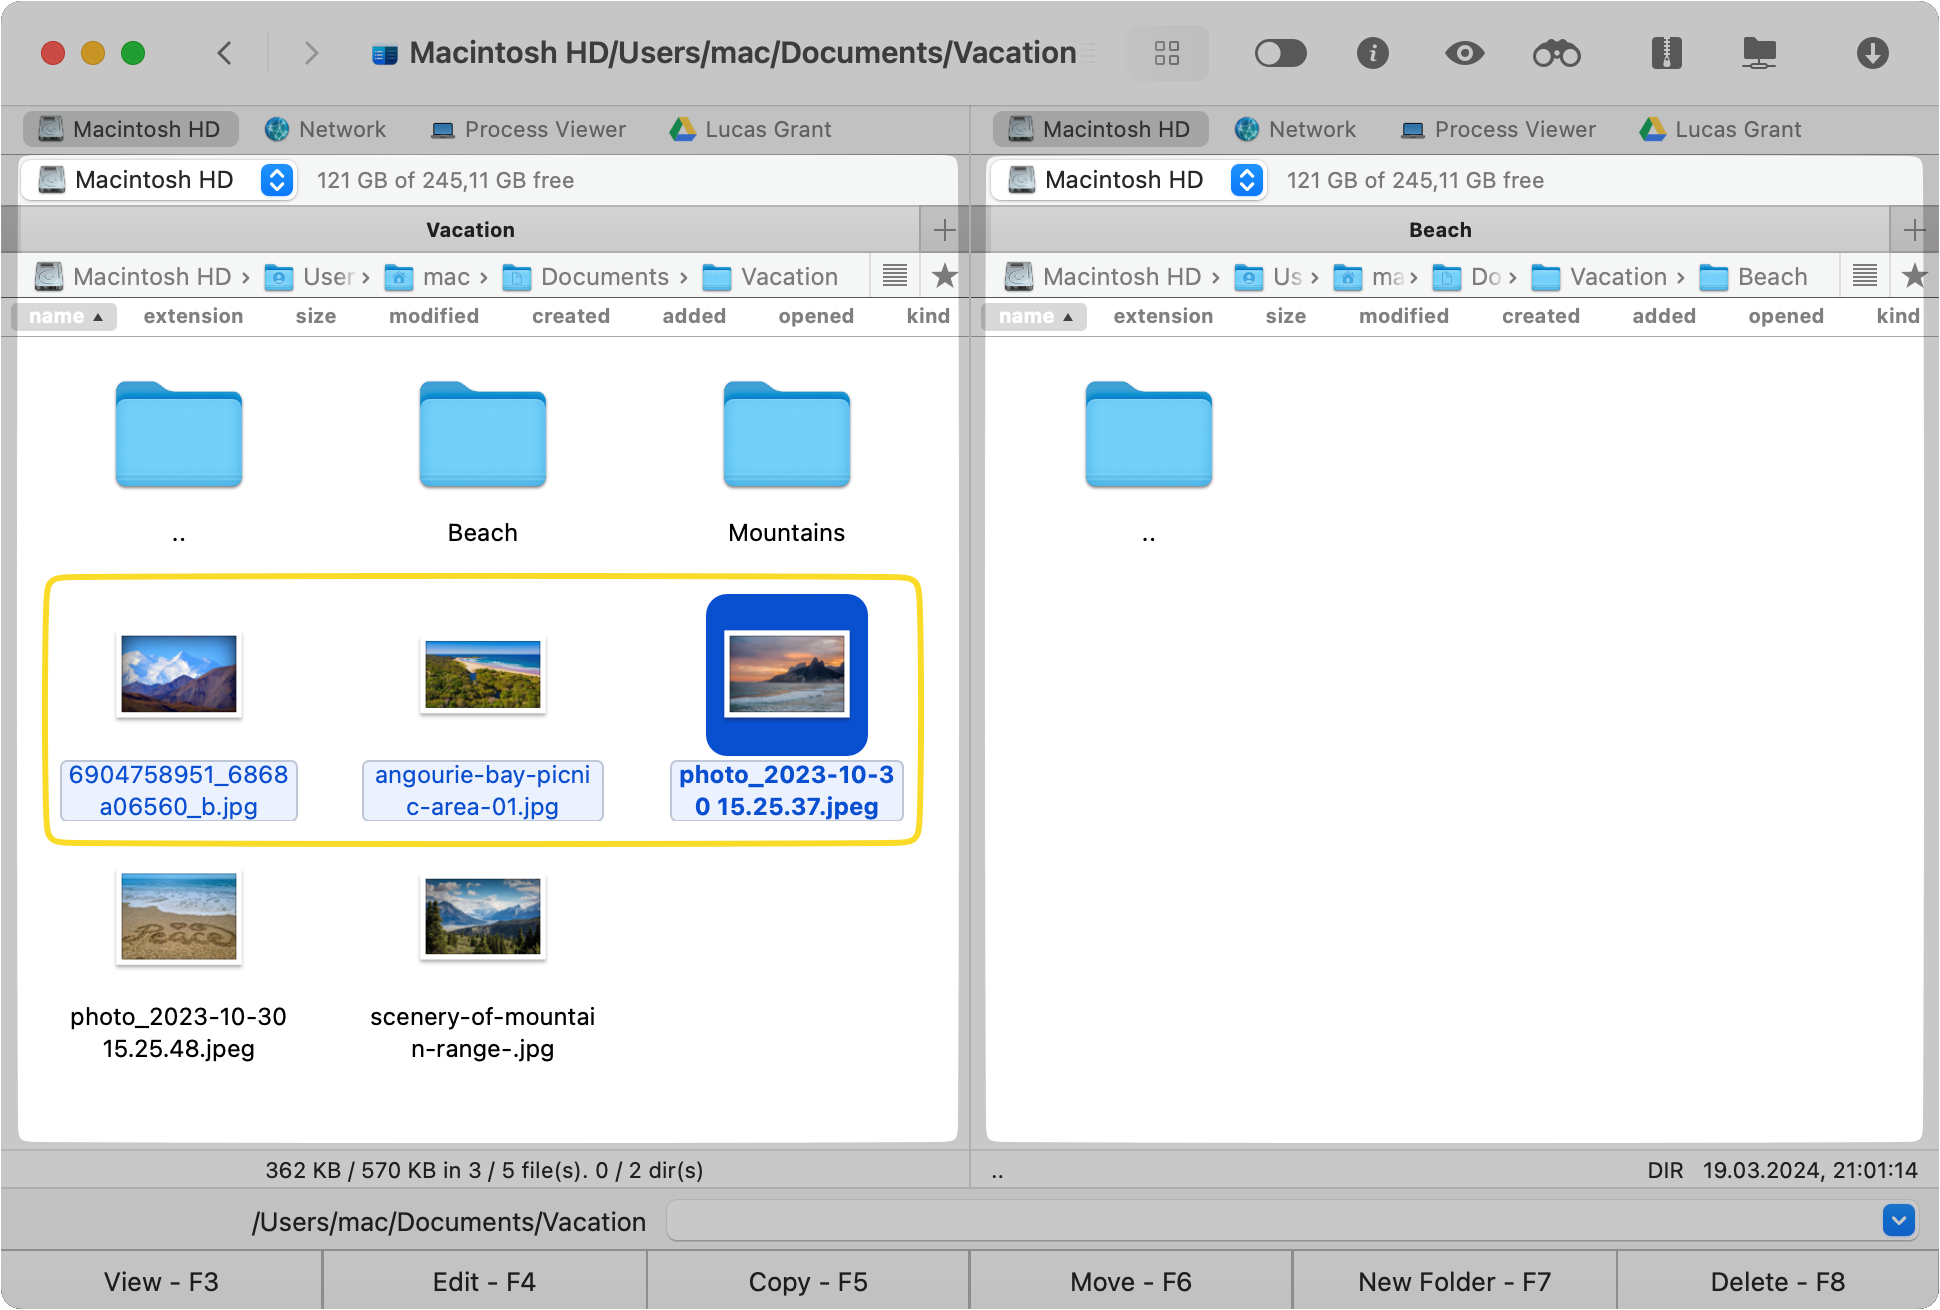 The files for archiving are selected in the left-panel of the app.